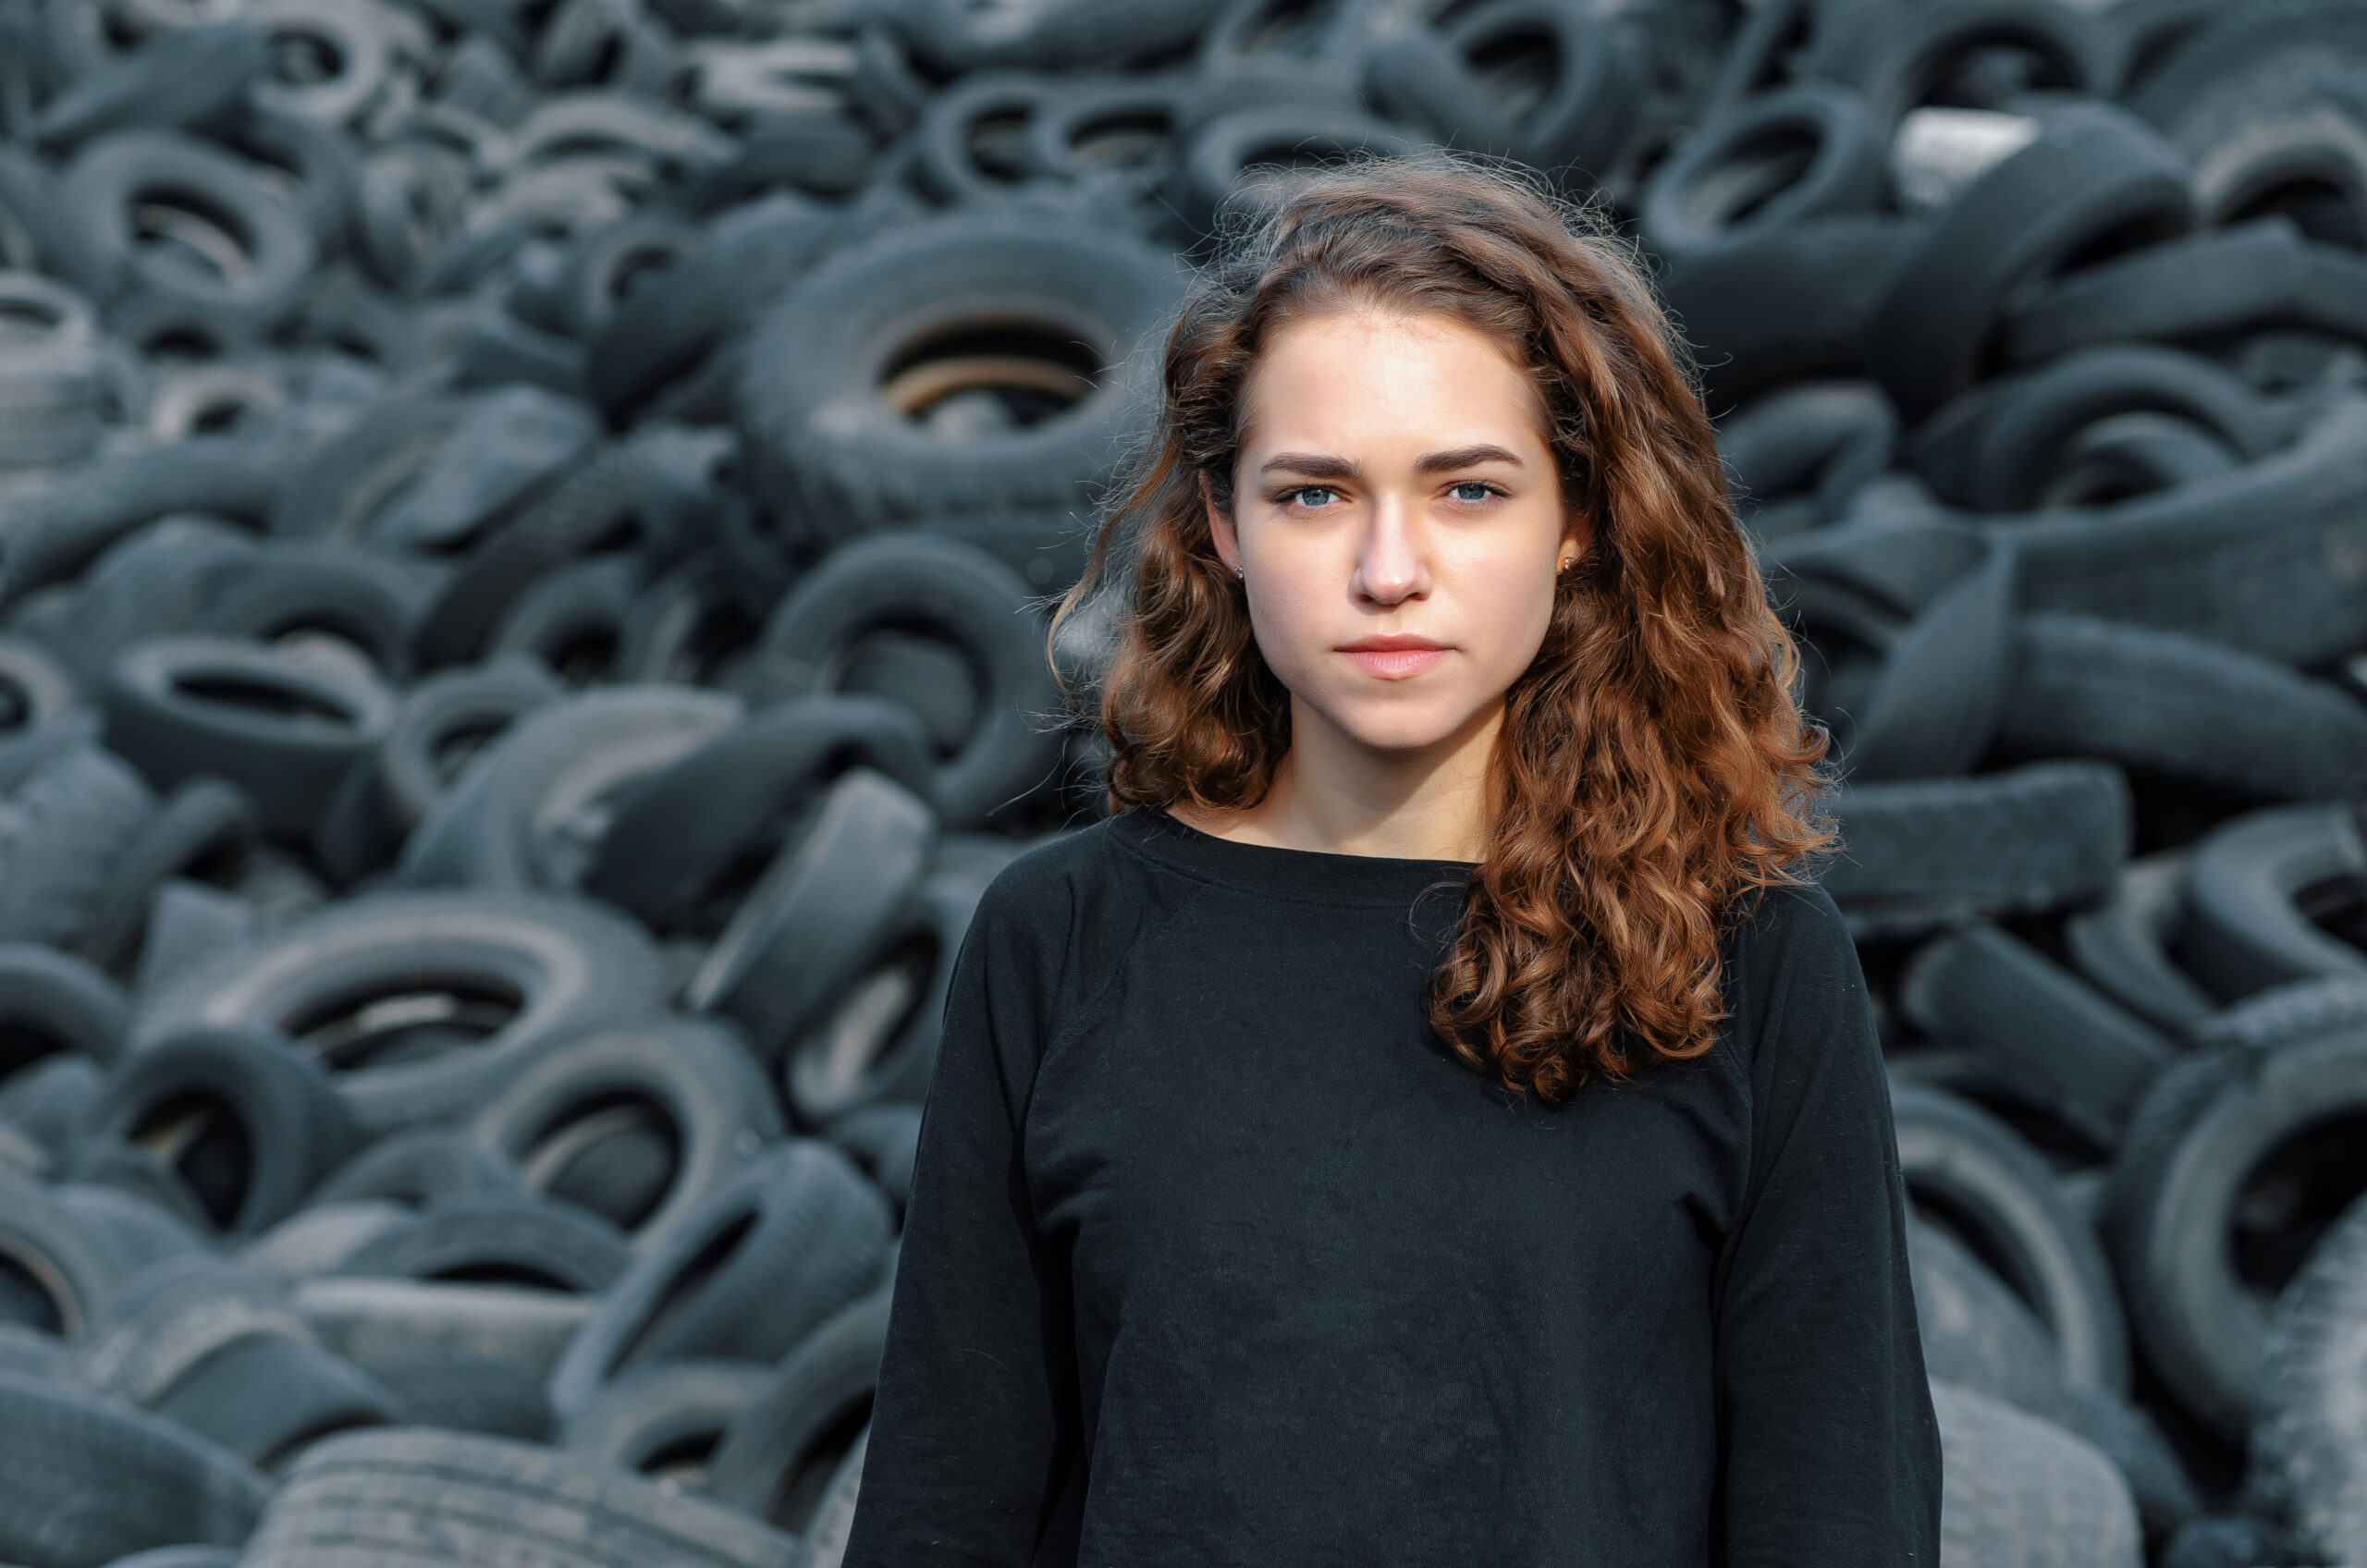 Beautiful girl, curly hair, portrait on the background of a dump of old car tires. Looking at camera.